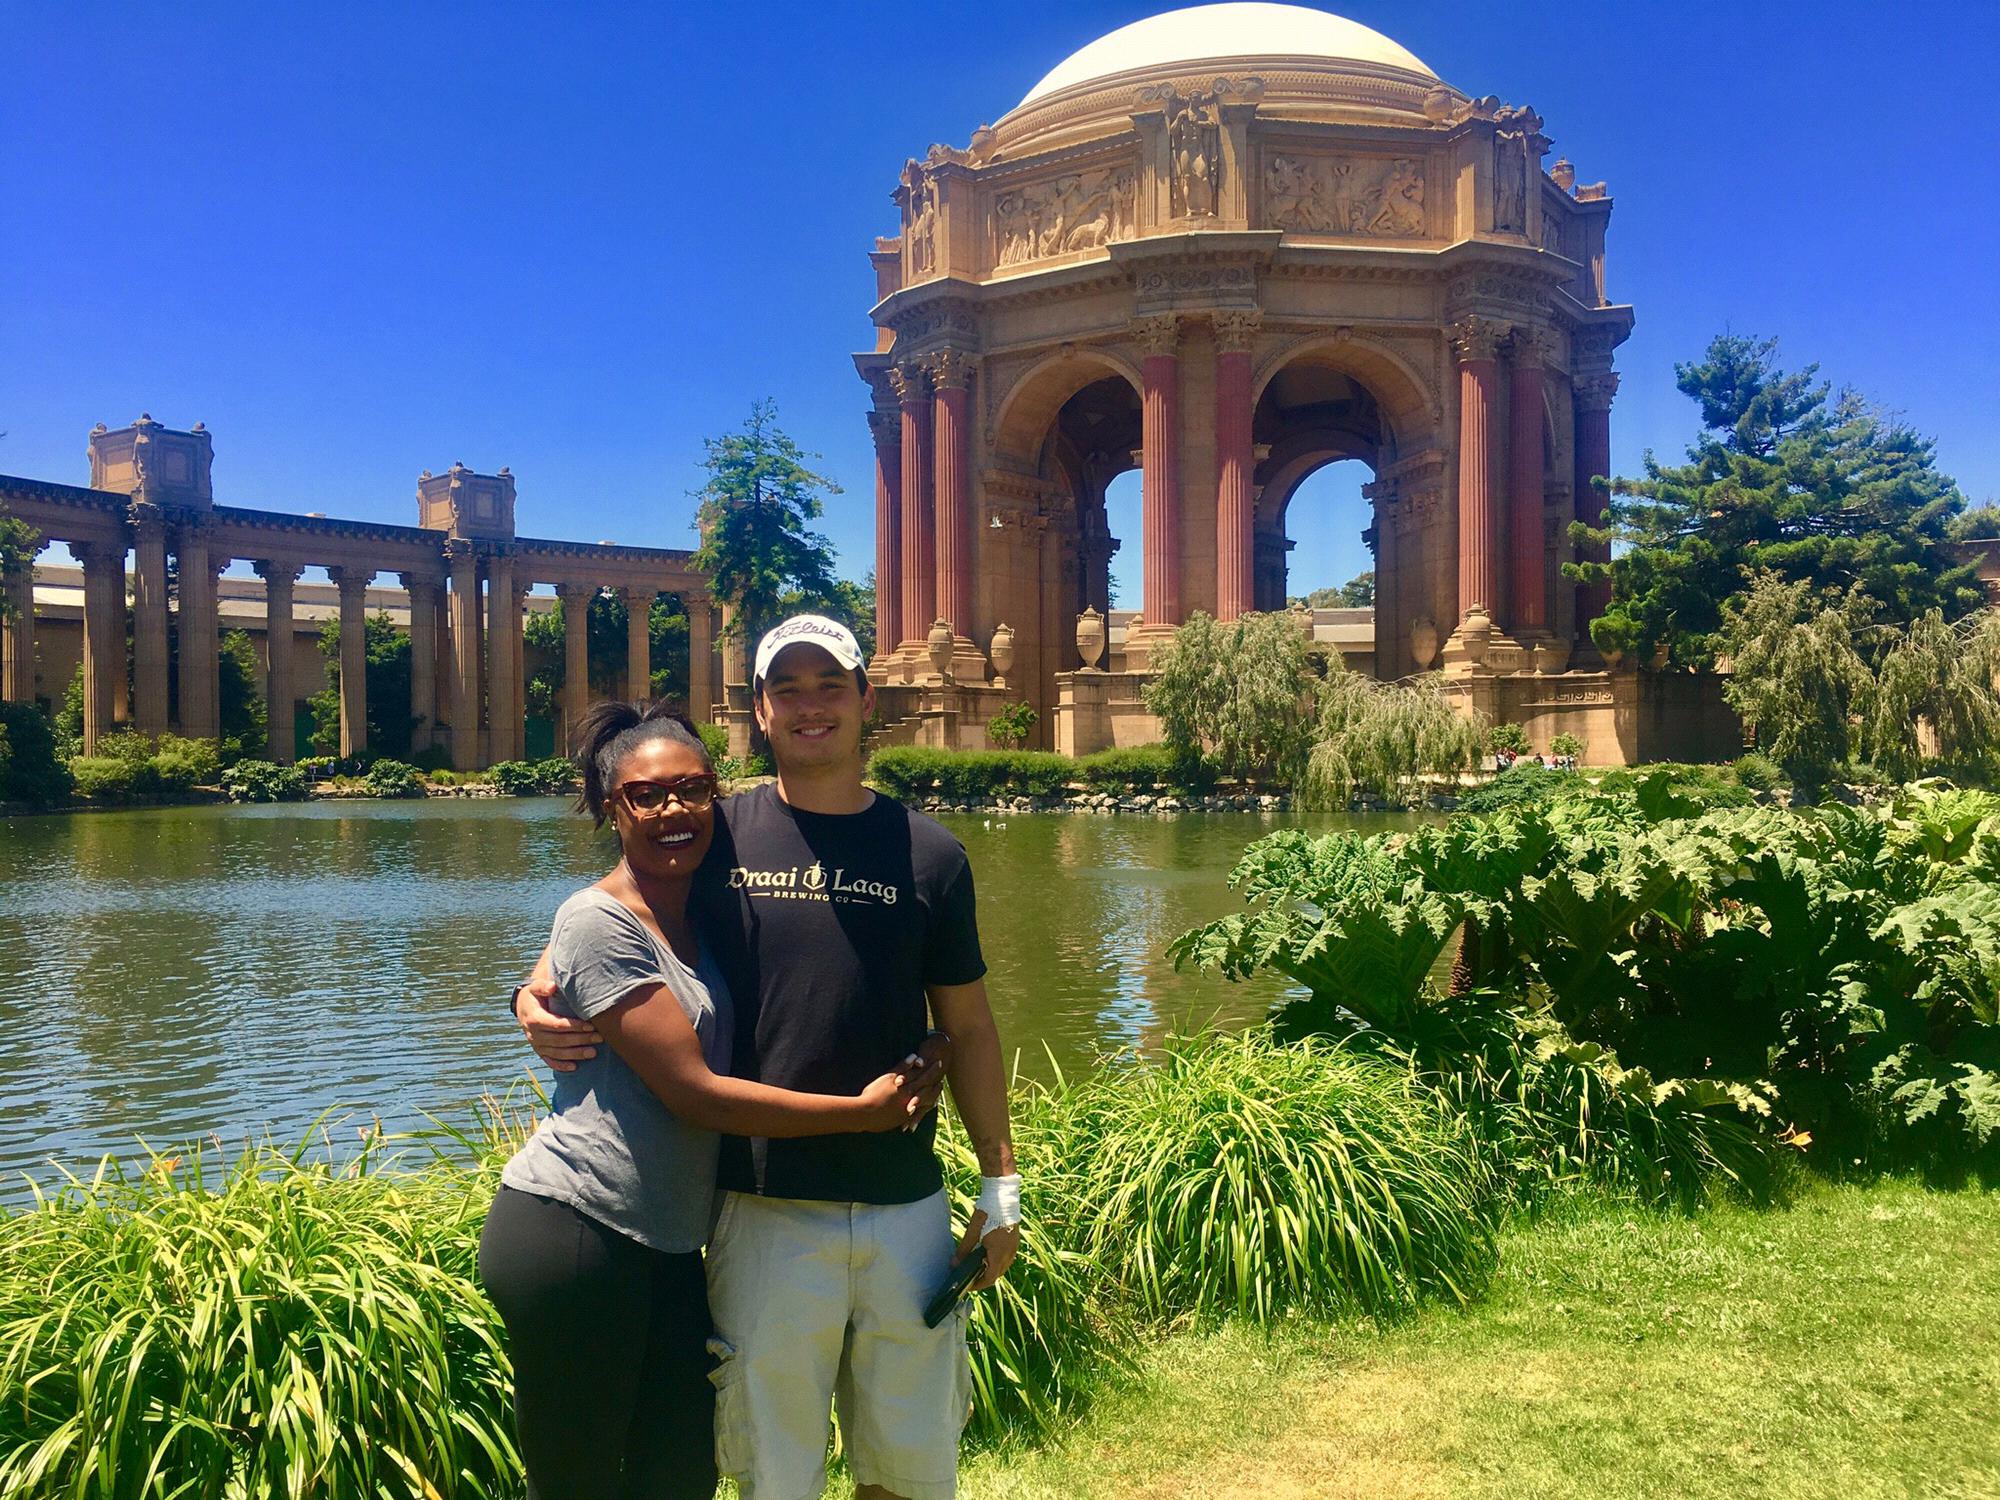 A lovely day in the City of San Francisco visiting the Palace of Fine Arts. 17'